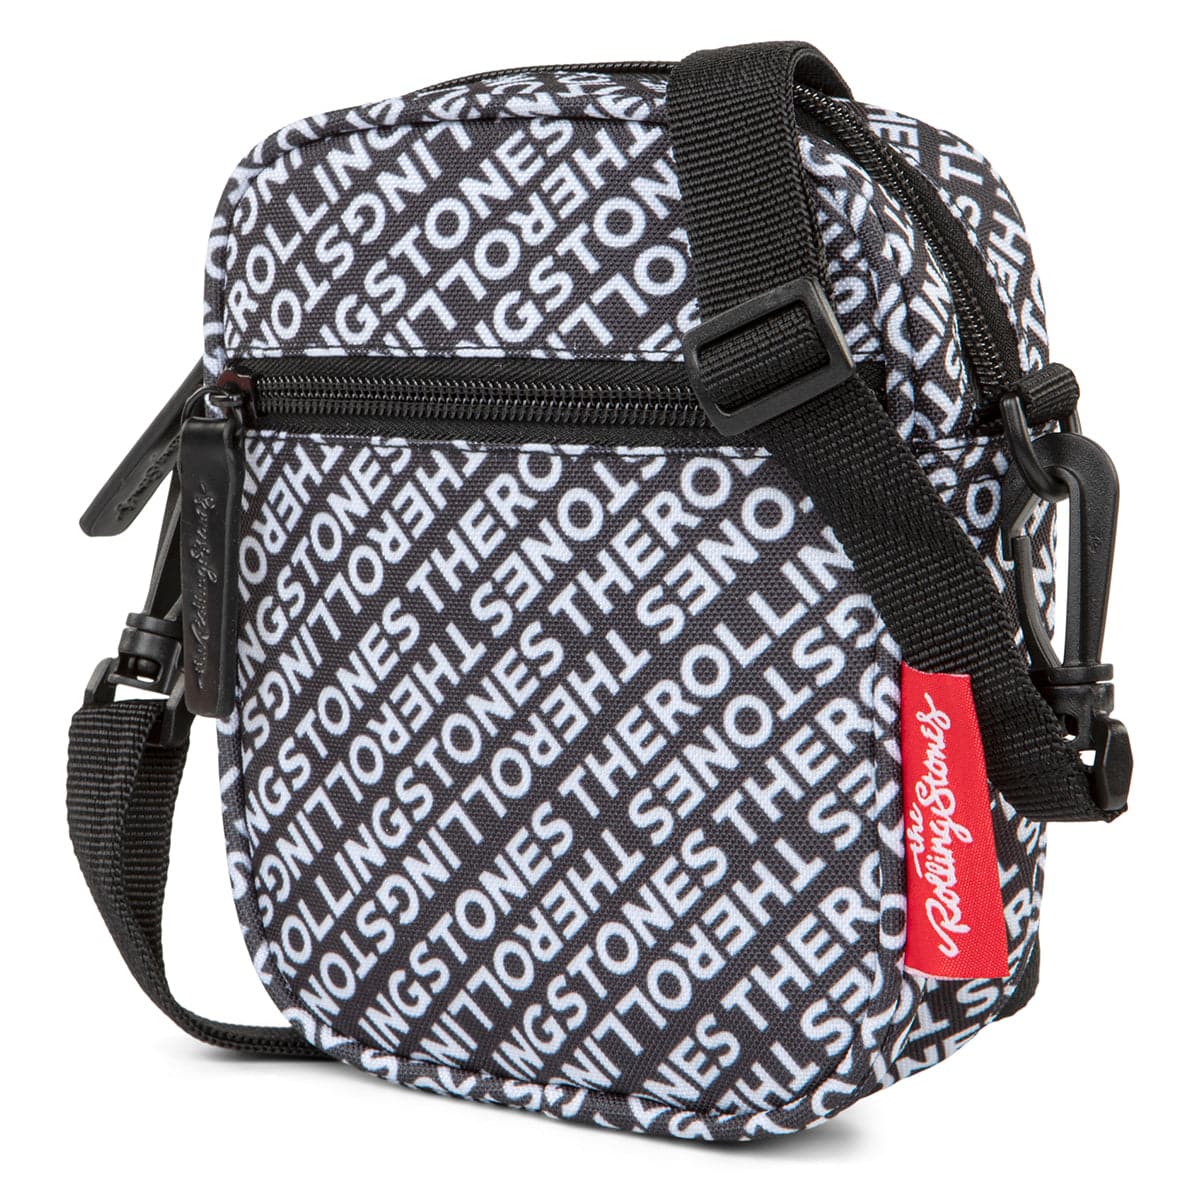 The Rolling Stones The Core Small Crossbody Bag